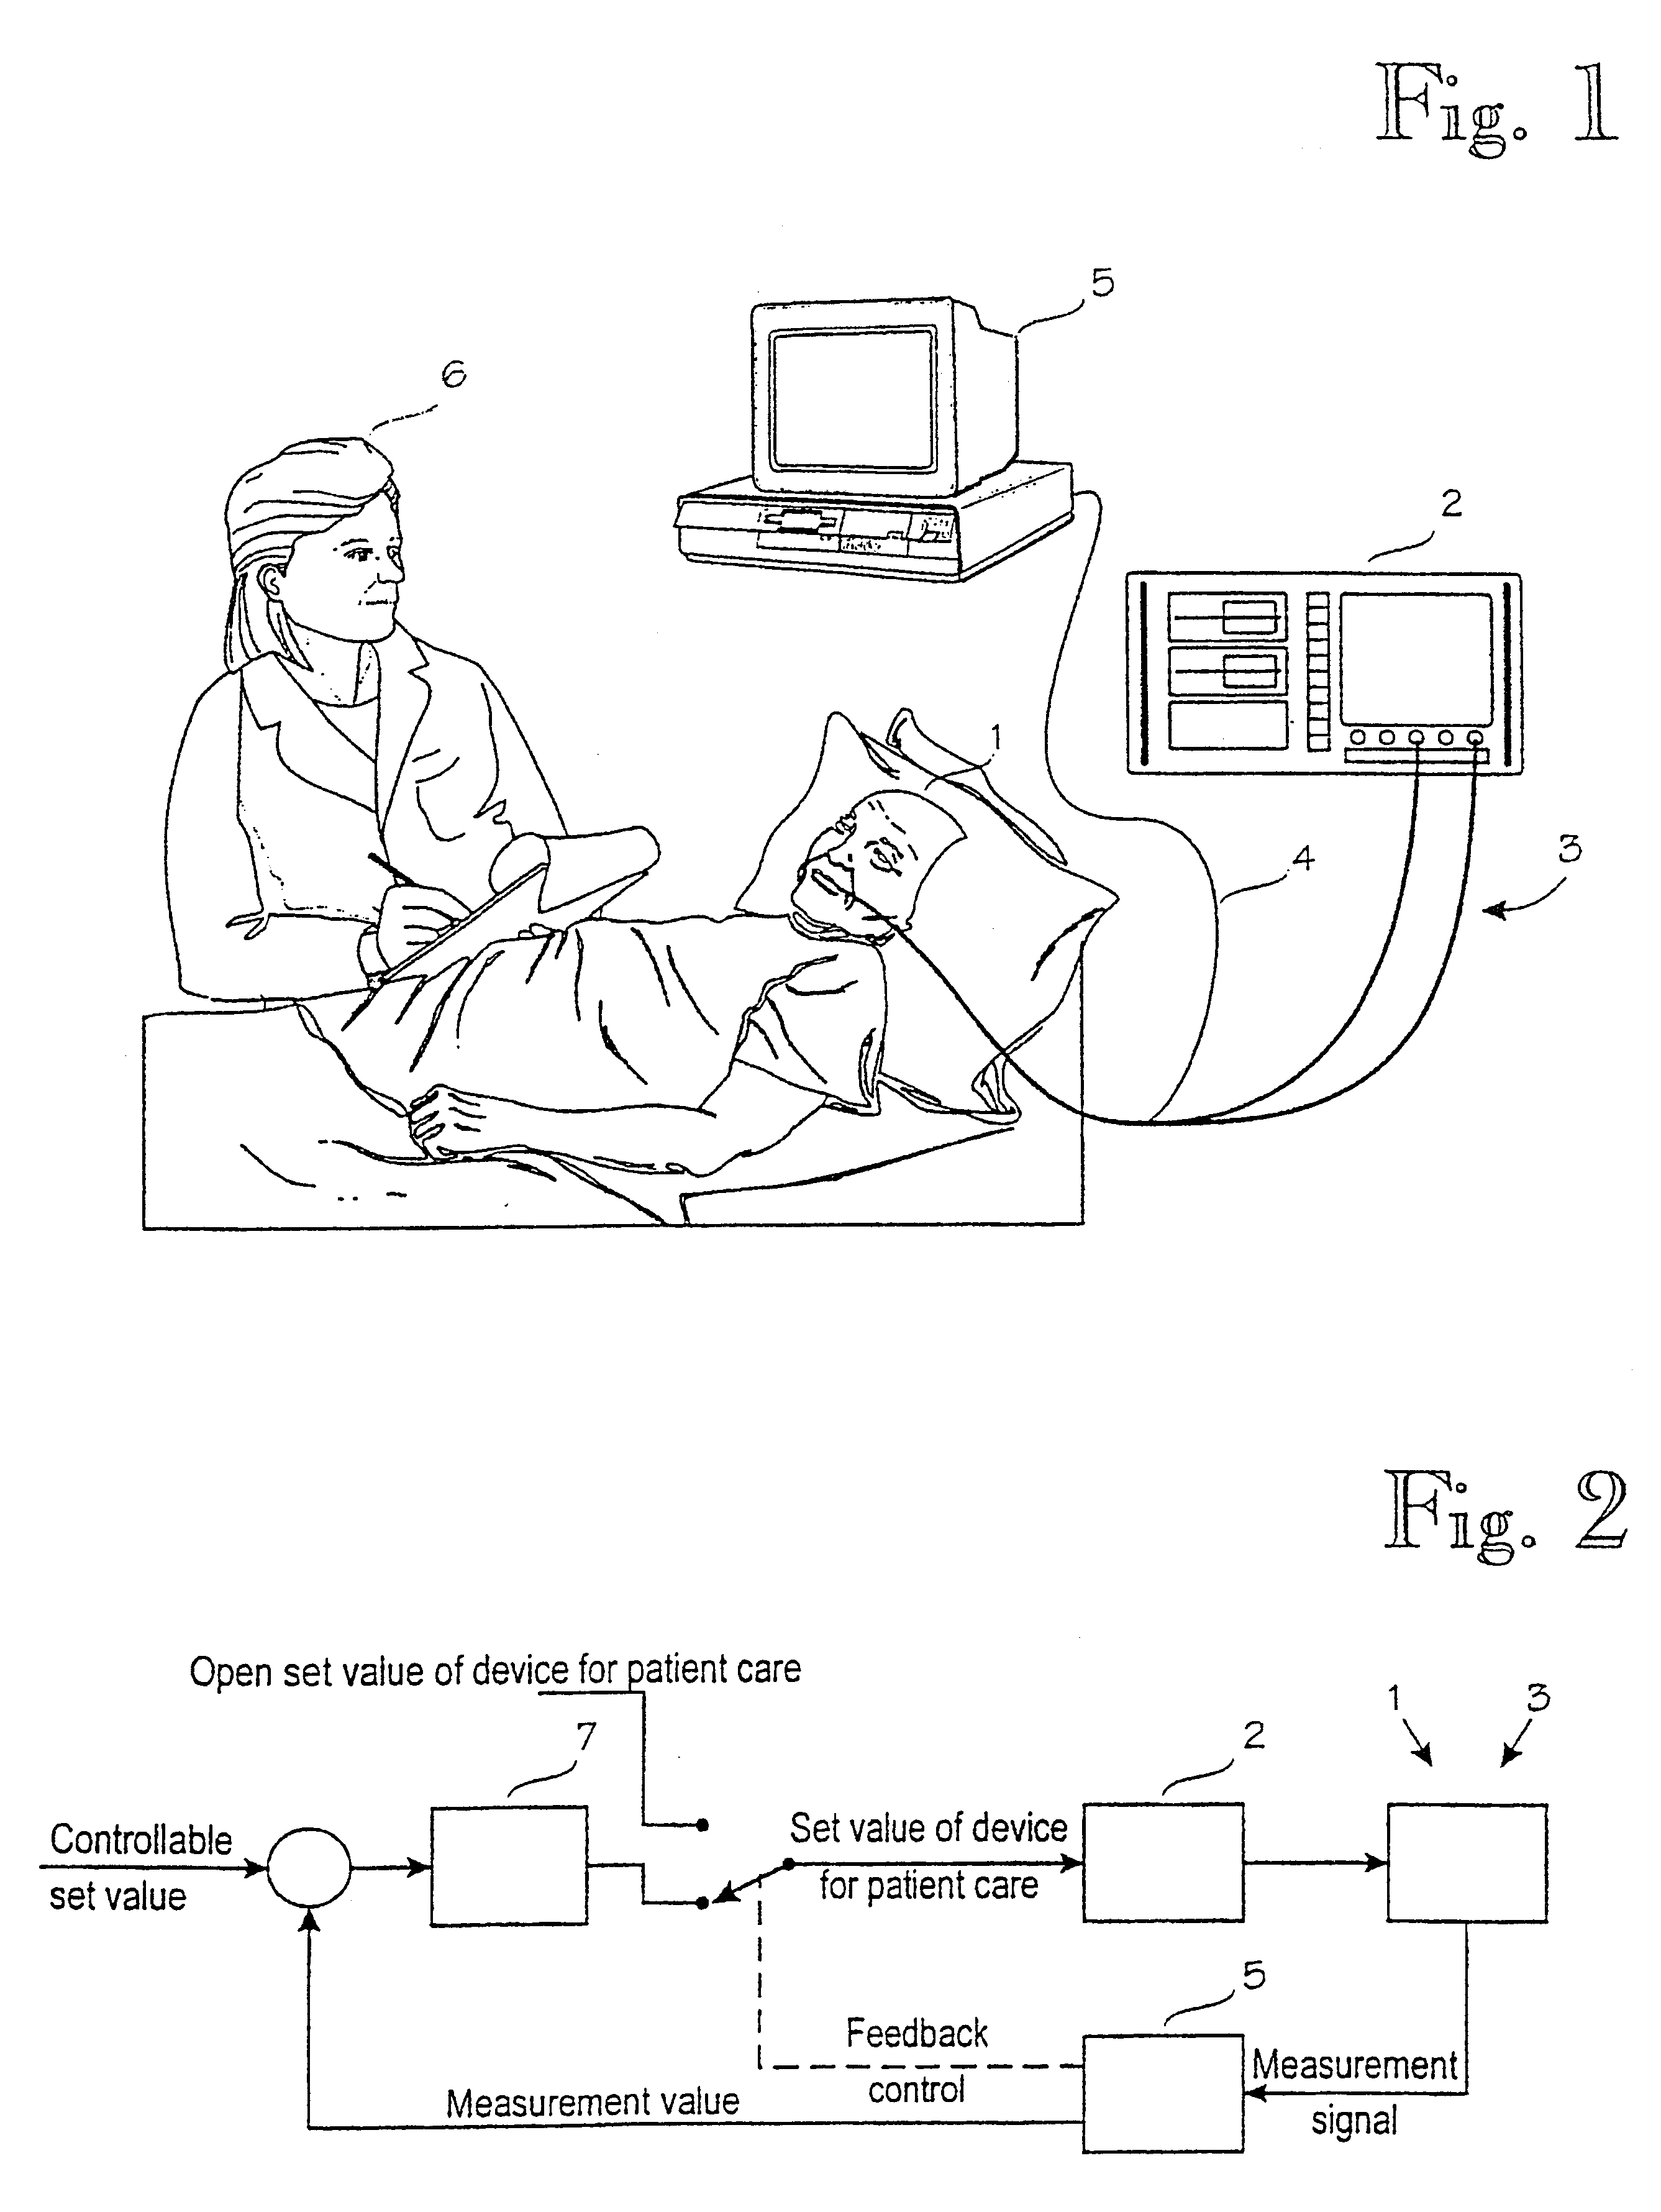 Arrangement in connection with equipment used in patient care